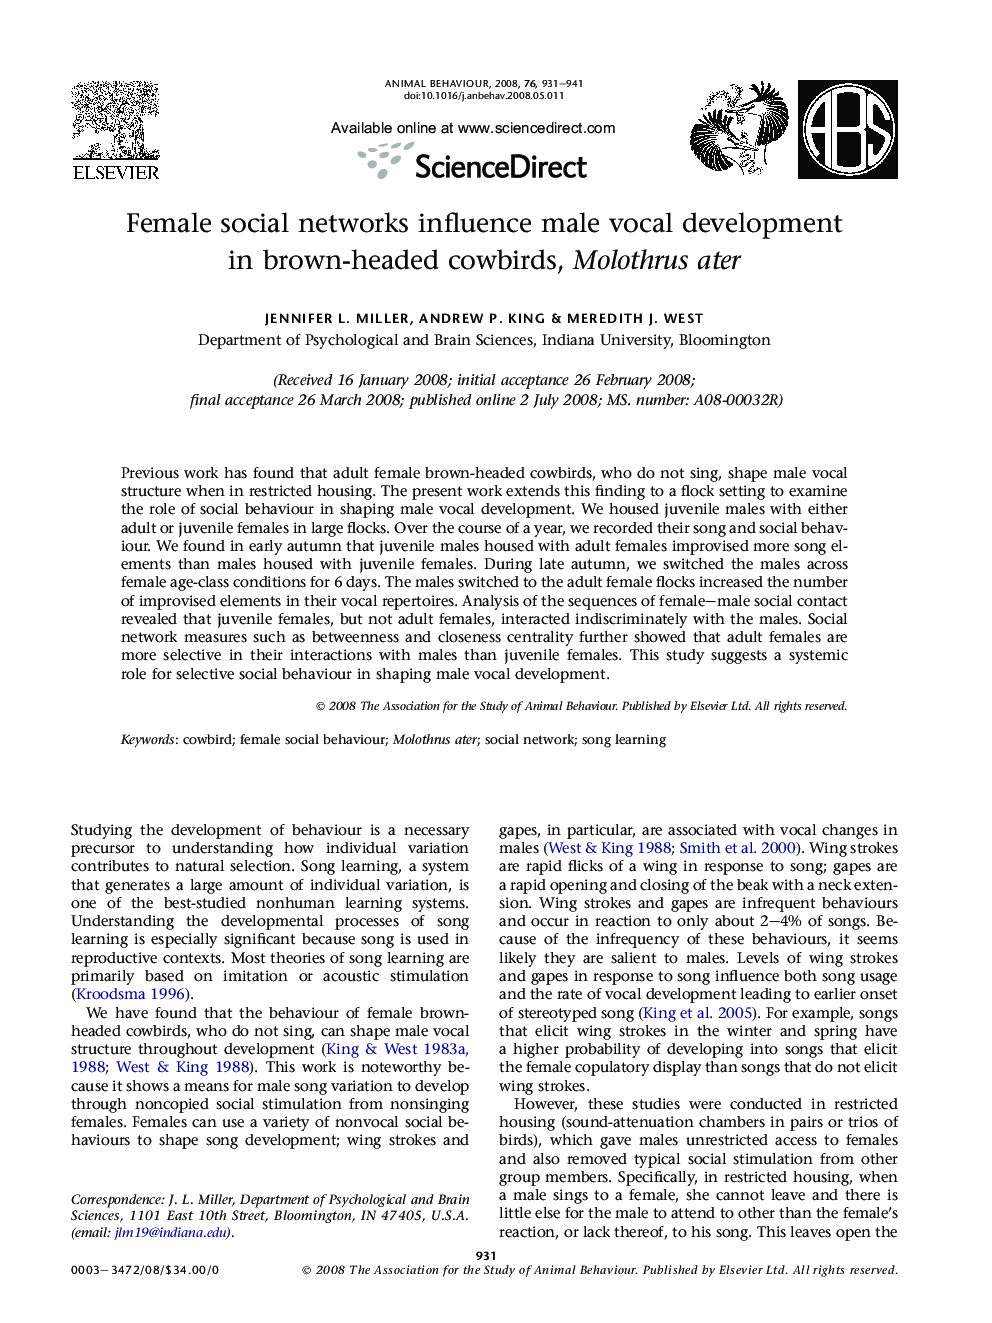 Female social networks influence male vocal development in brown-headed cowbirds, Molothrus ater